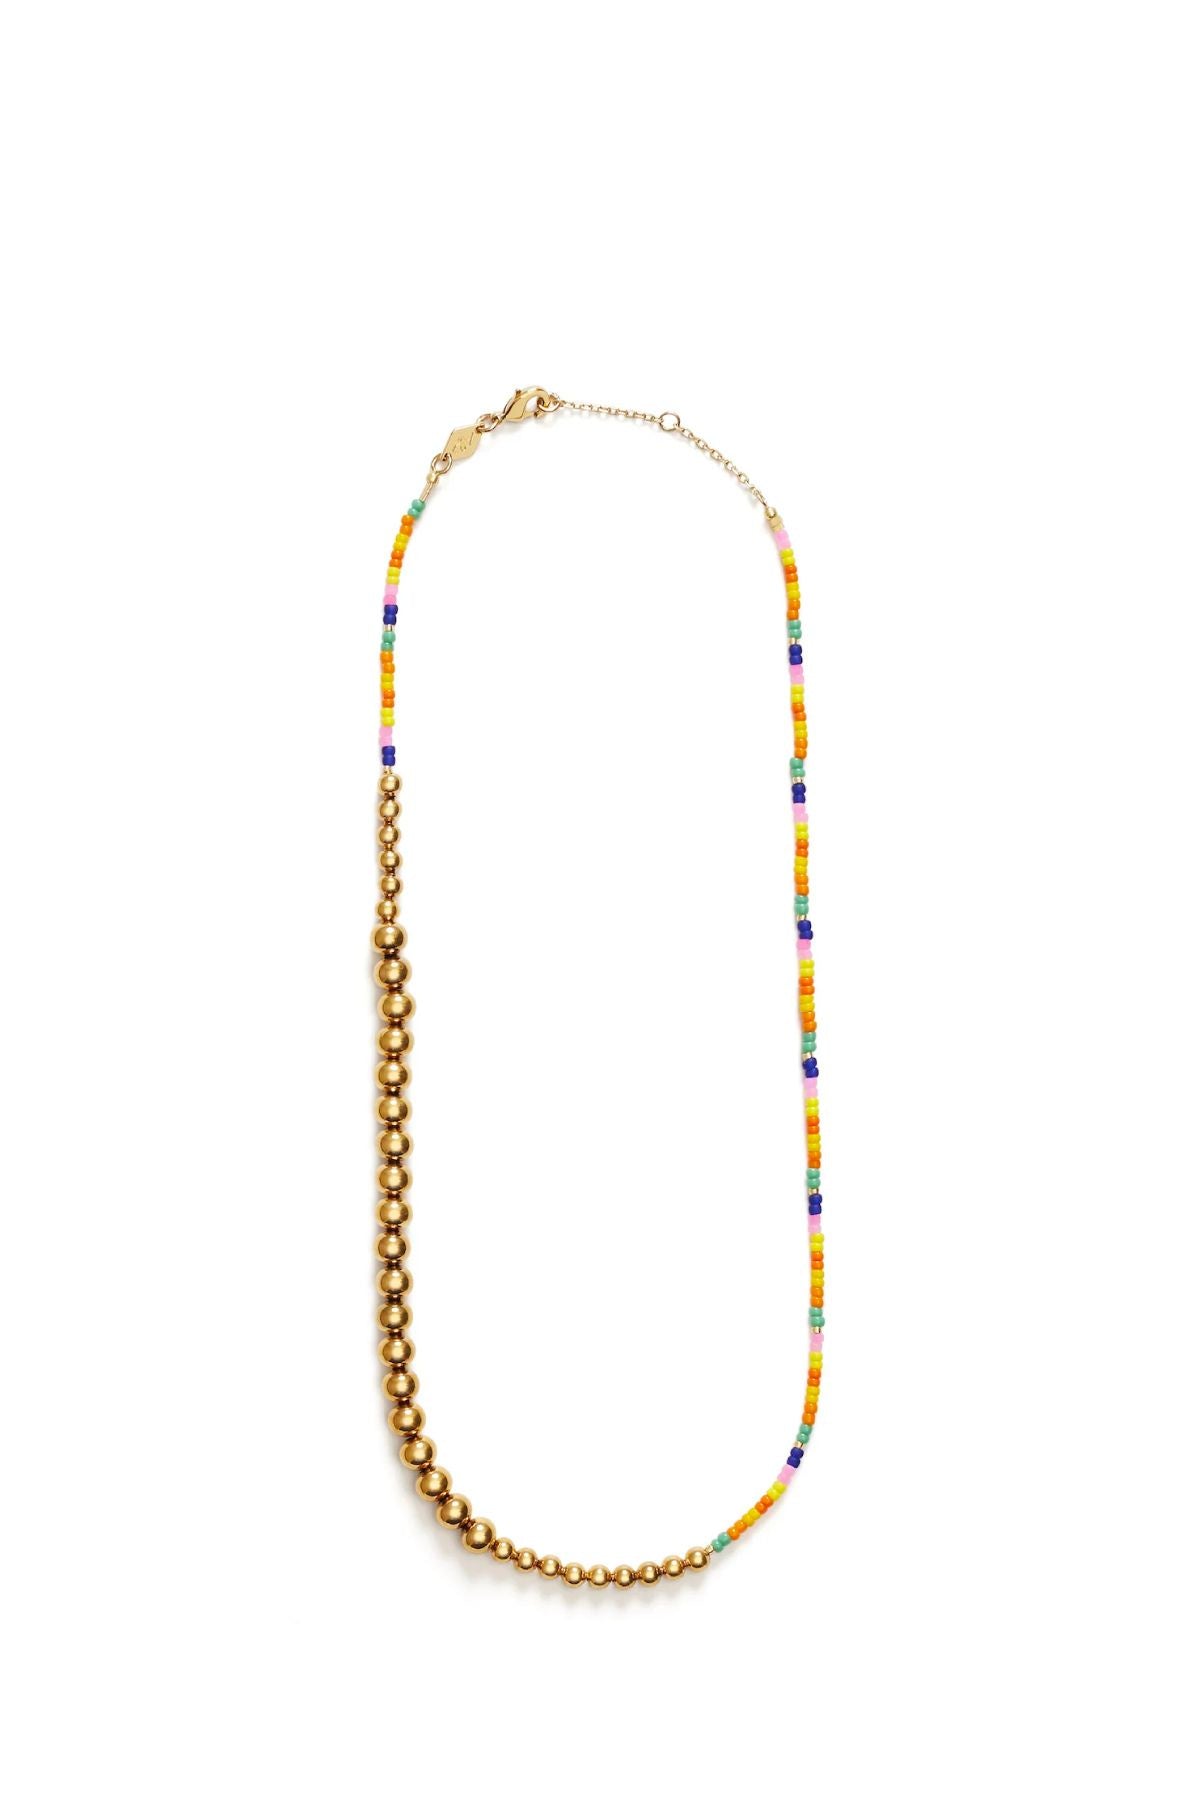 Anni Lu Maybe Baby Necklace - Gold